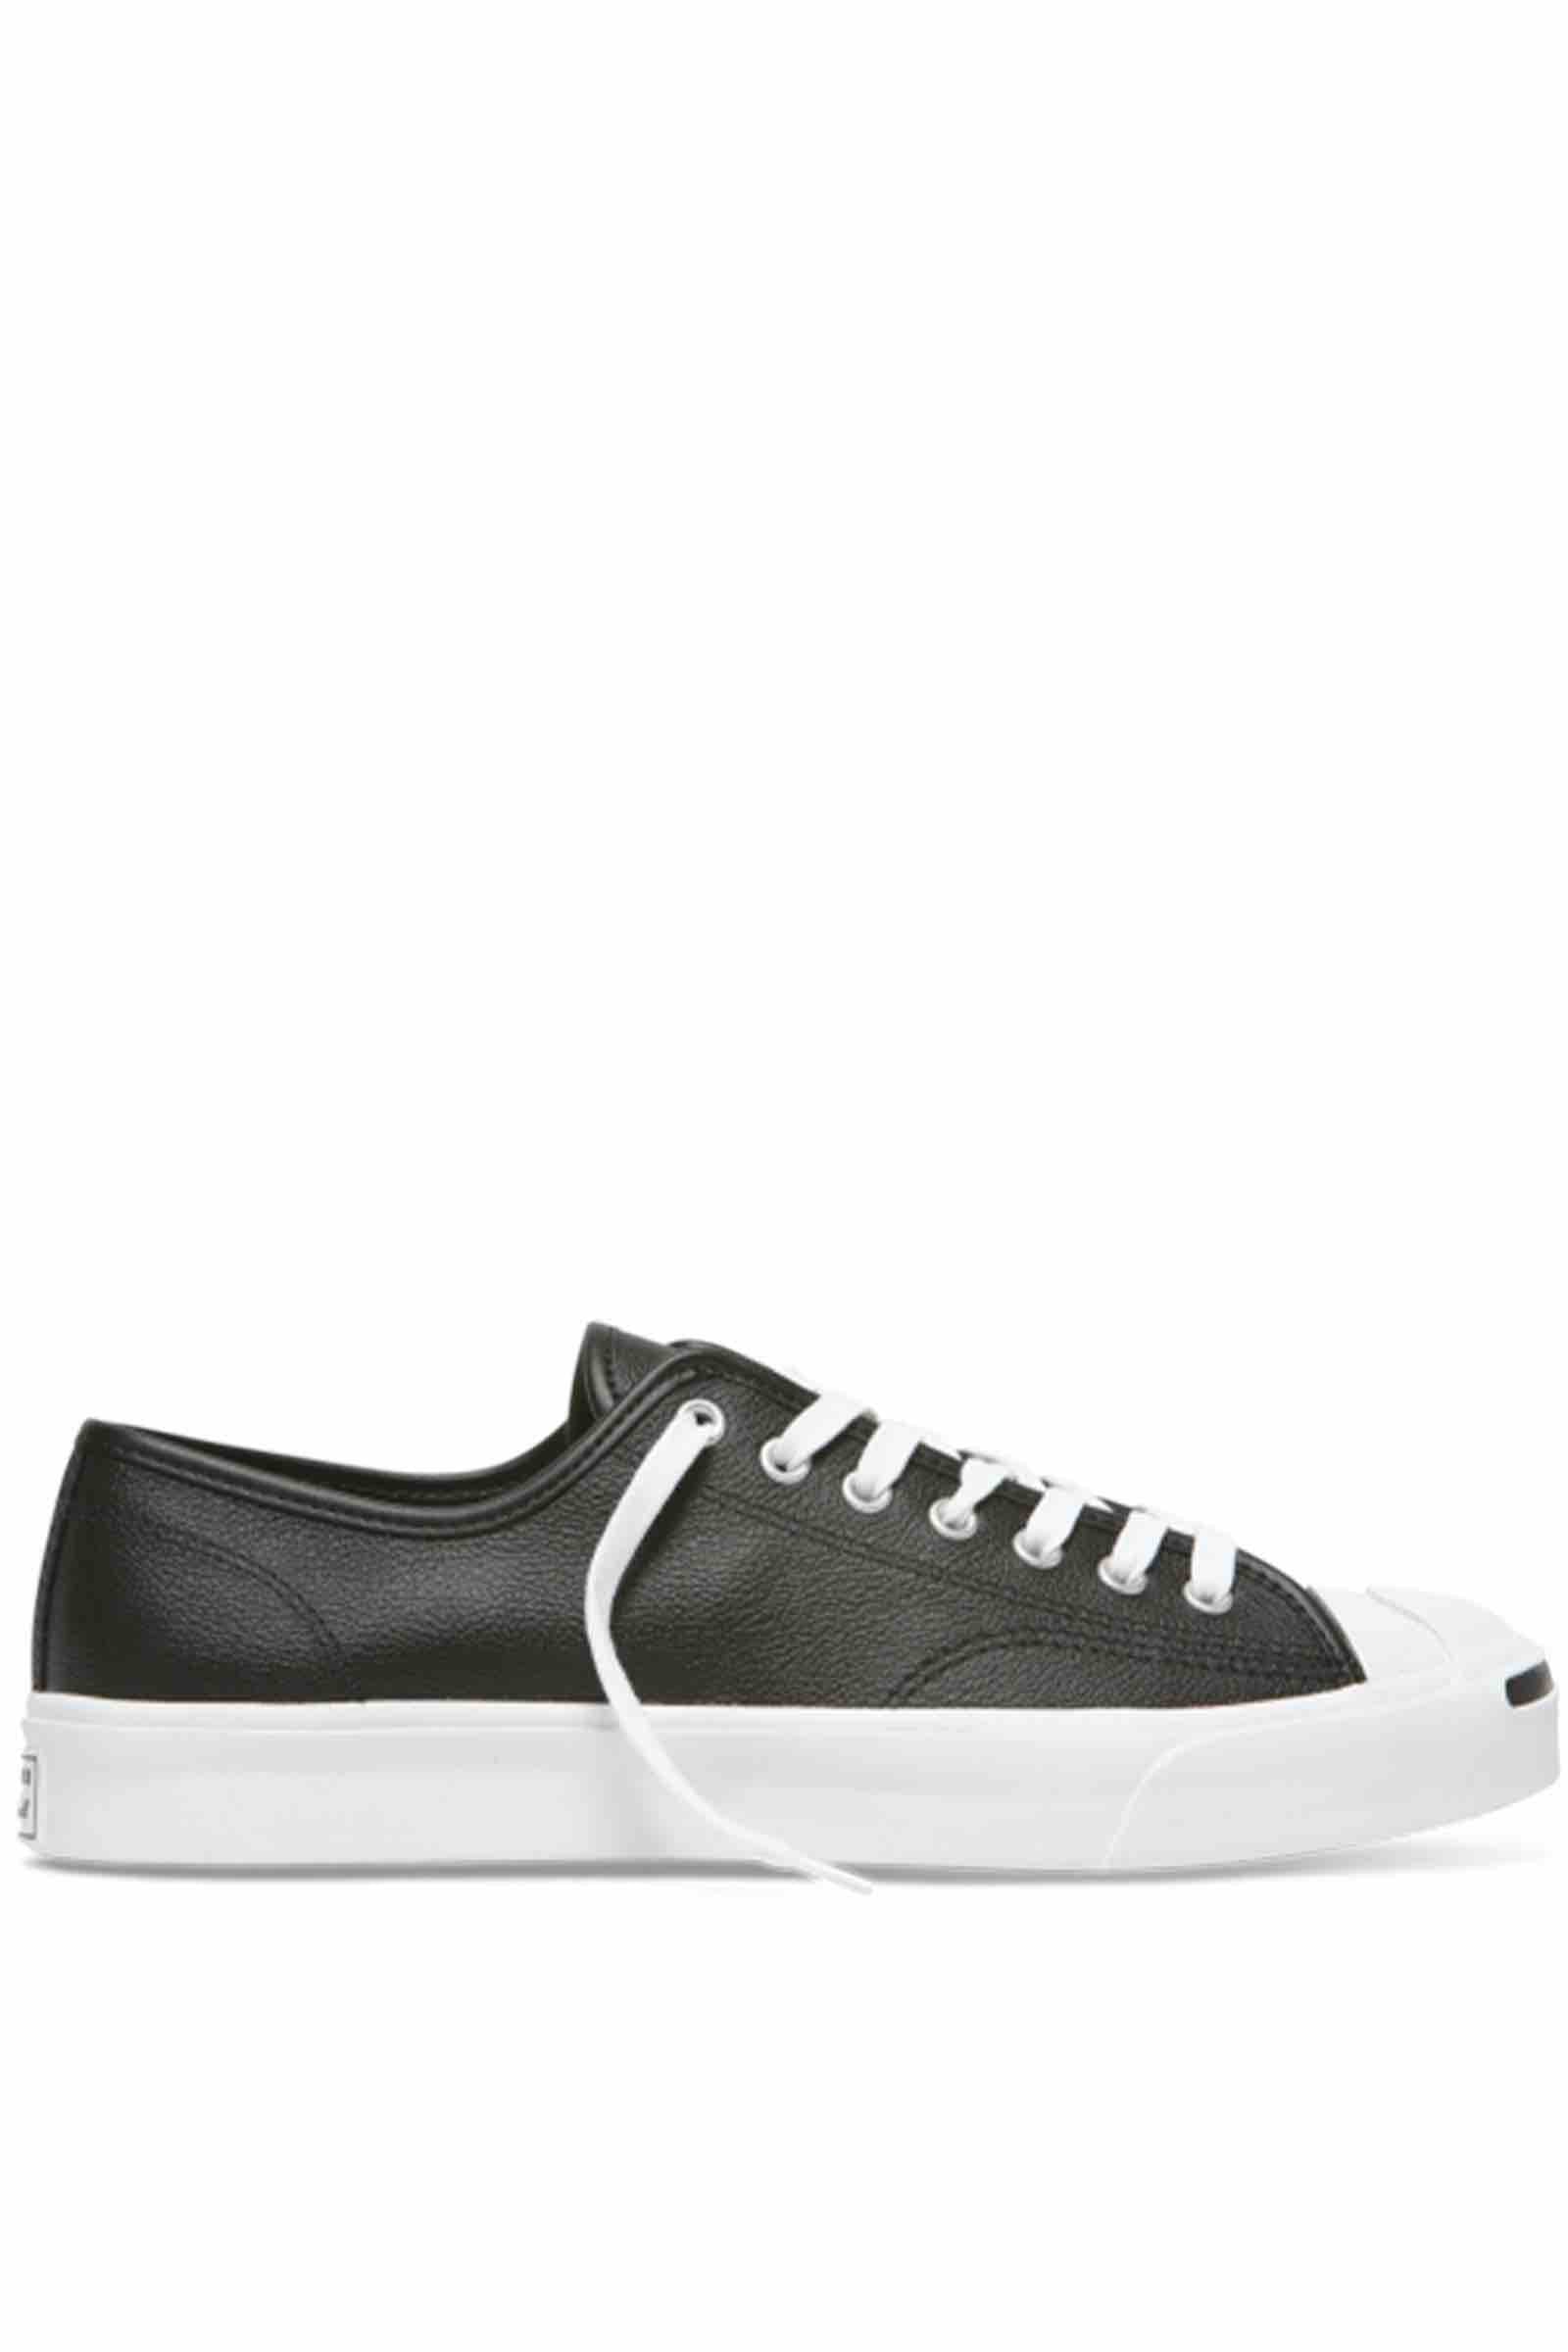 converse jack purcell ox leather